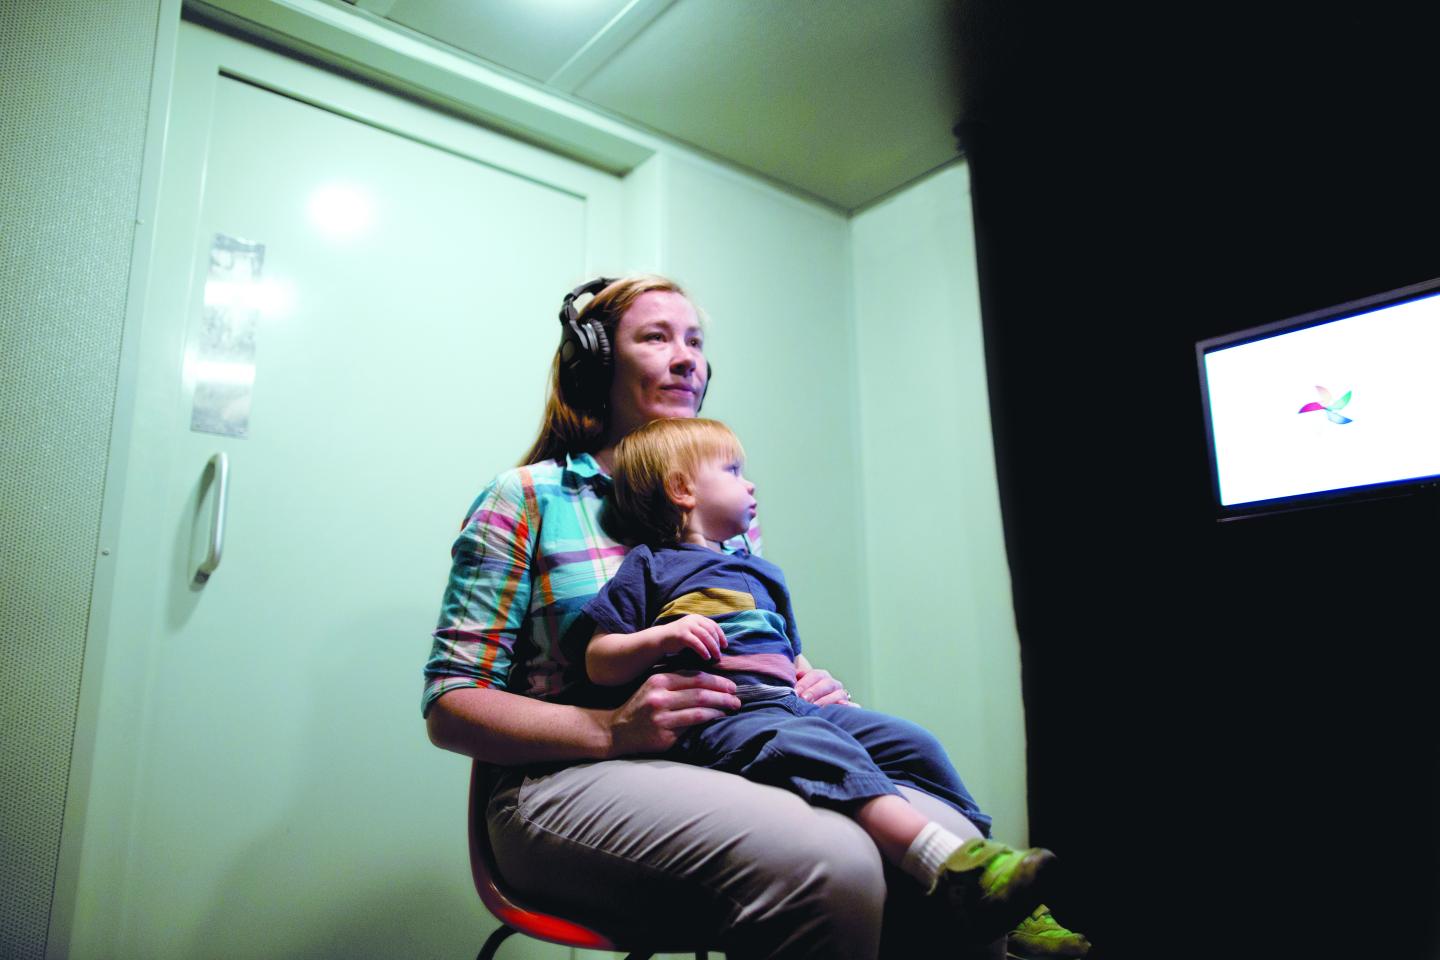 University of Tennessee's Infant Language and Perceptual Learning Lab